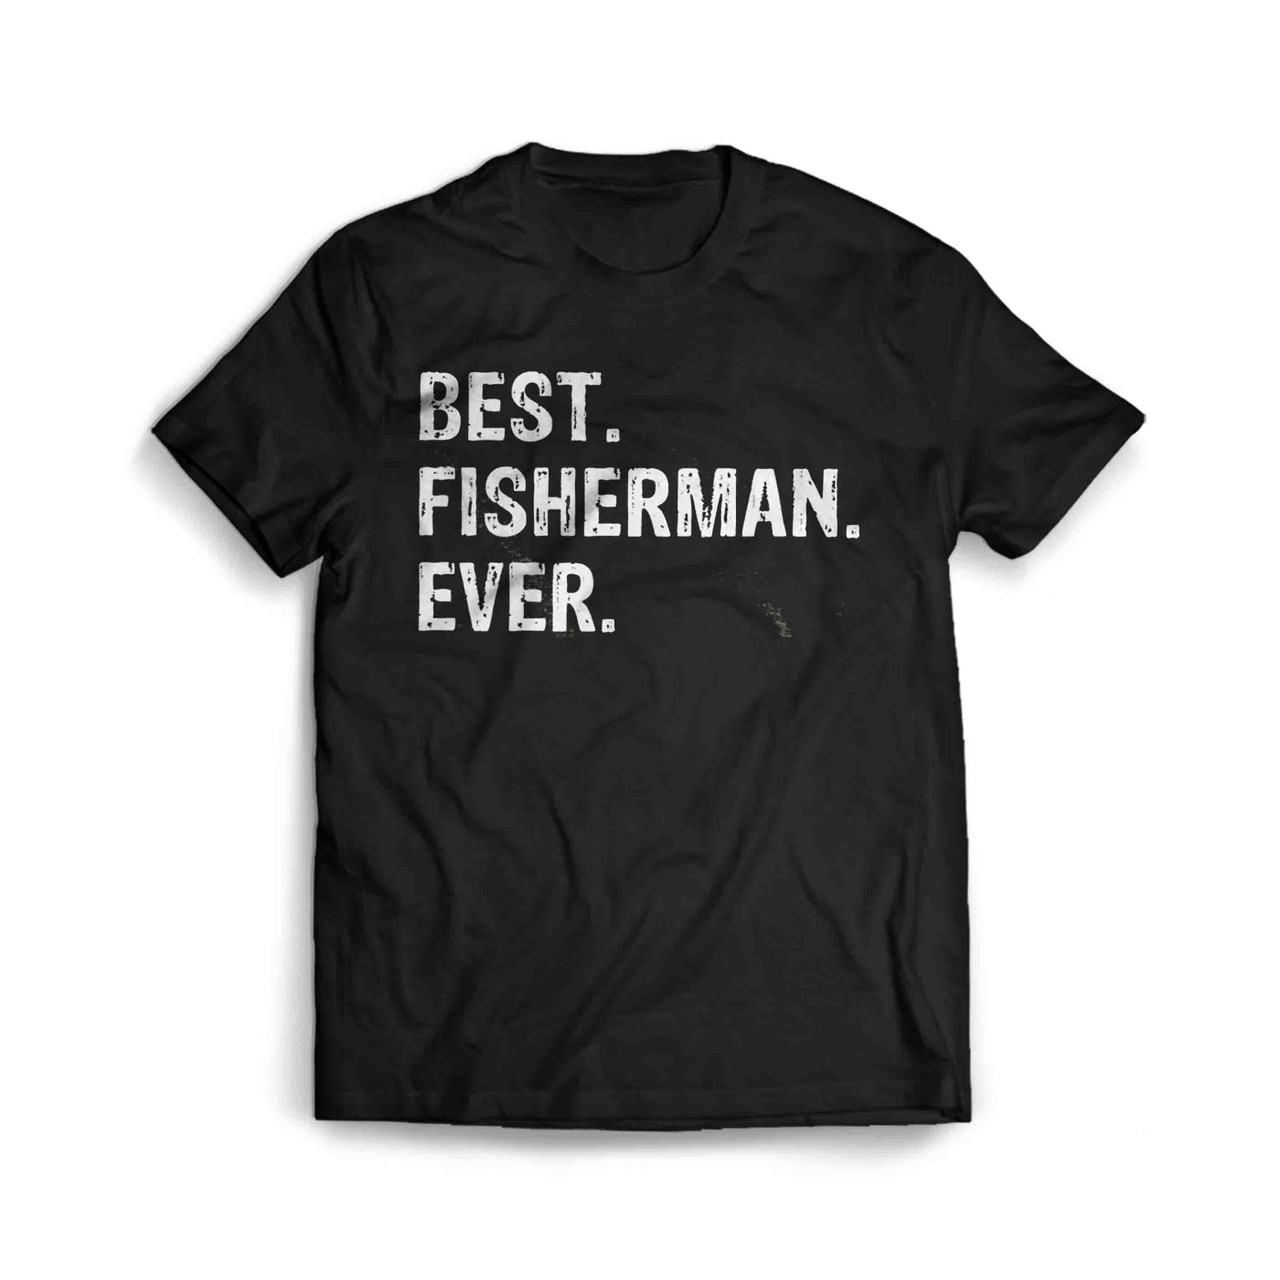 Dad and Daughter Fishing Partners for Life Fisherman Gift T-shirts unisex Tees Black/S